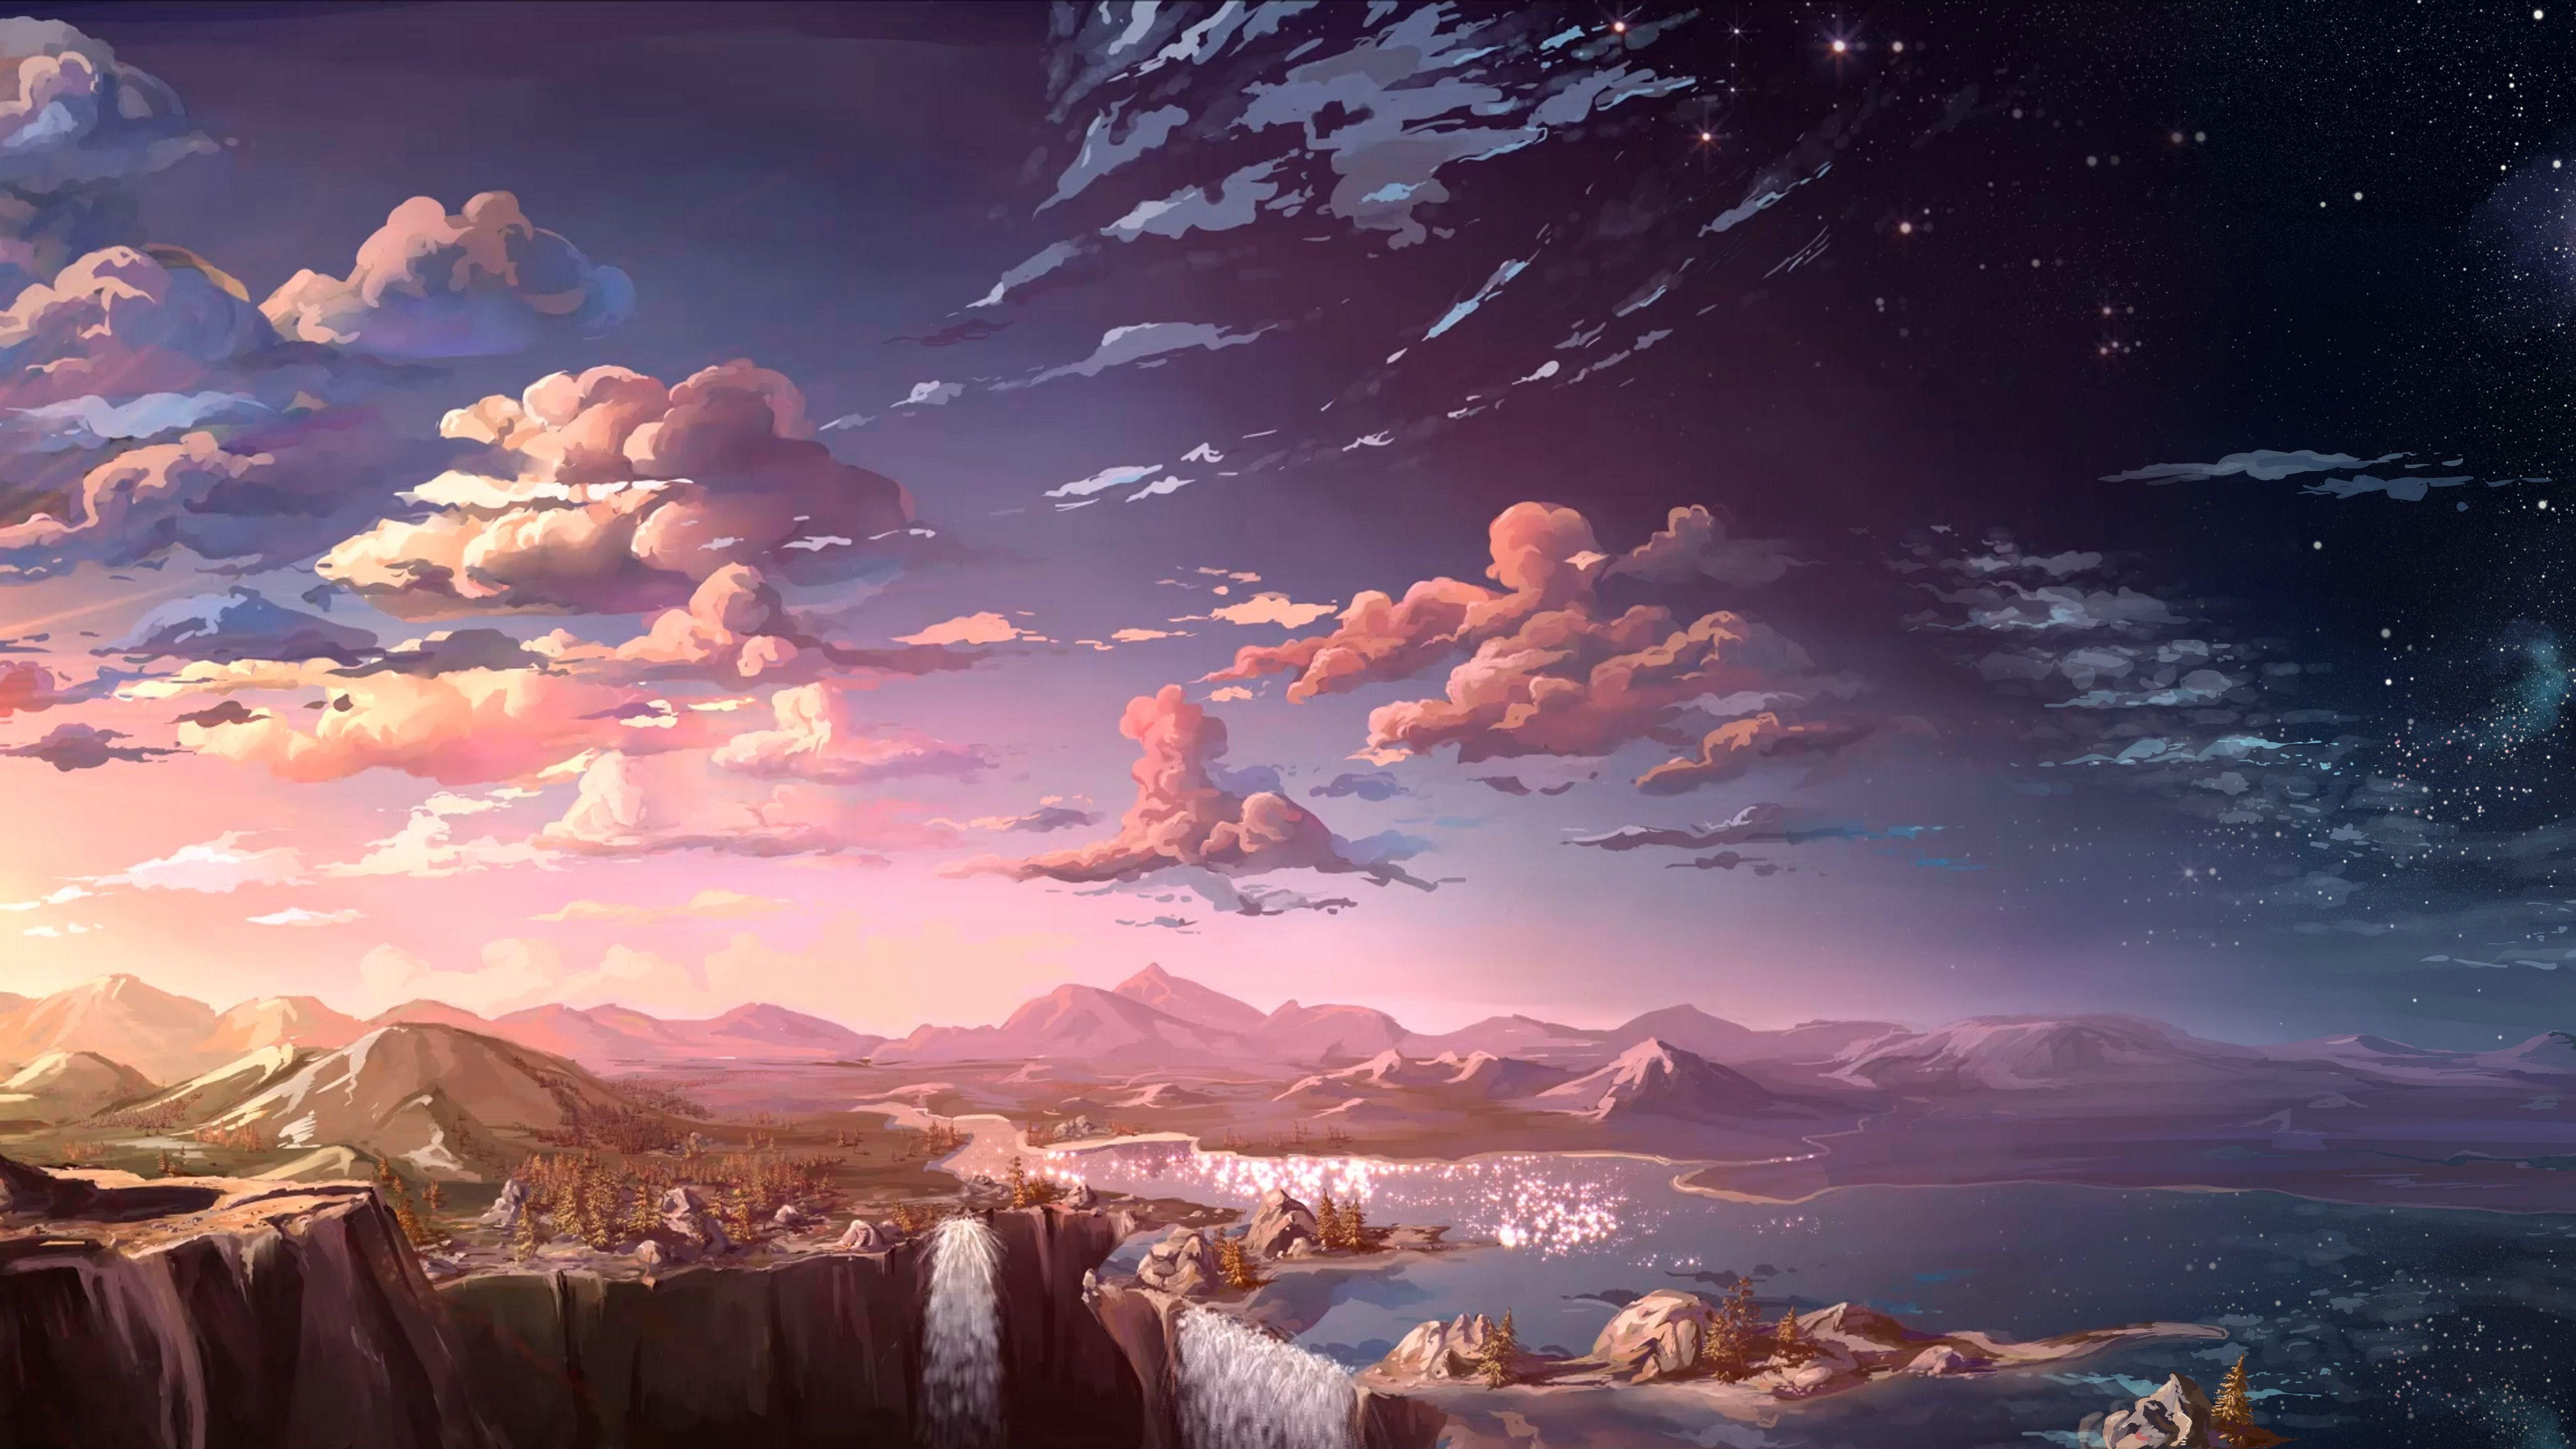 Download Beautiful Anime Scenery Skins - Purple Gaming Wallpaper Hd PNG  Image with No Background - PNGkey.com